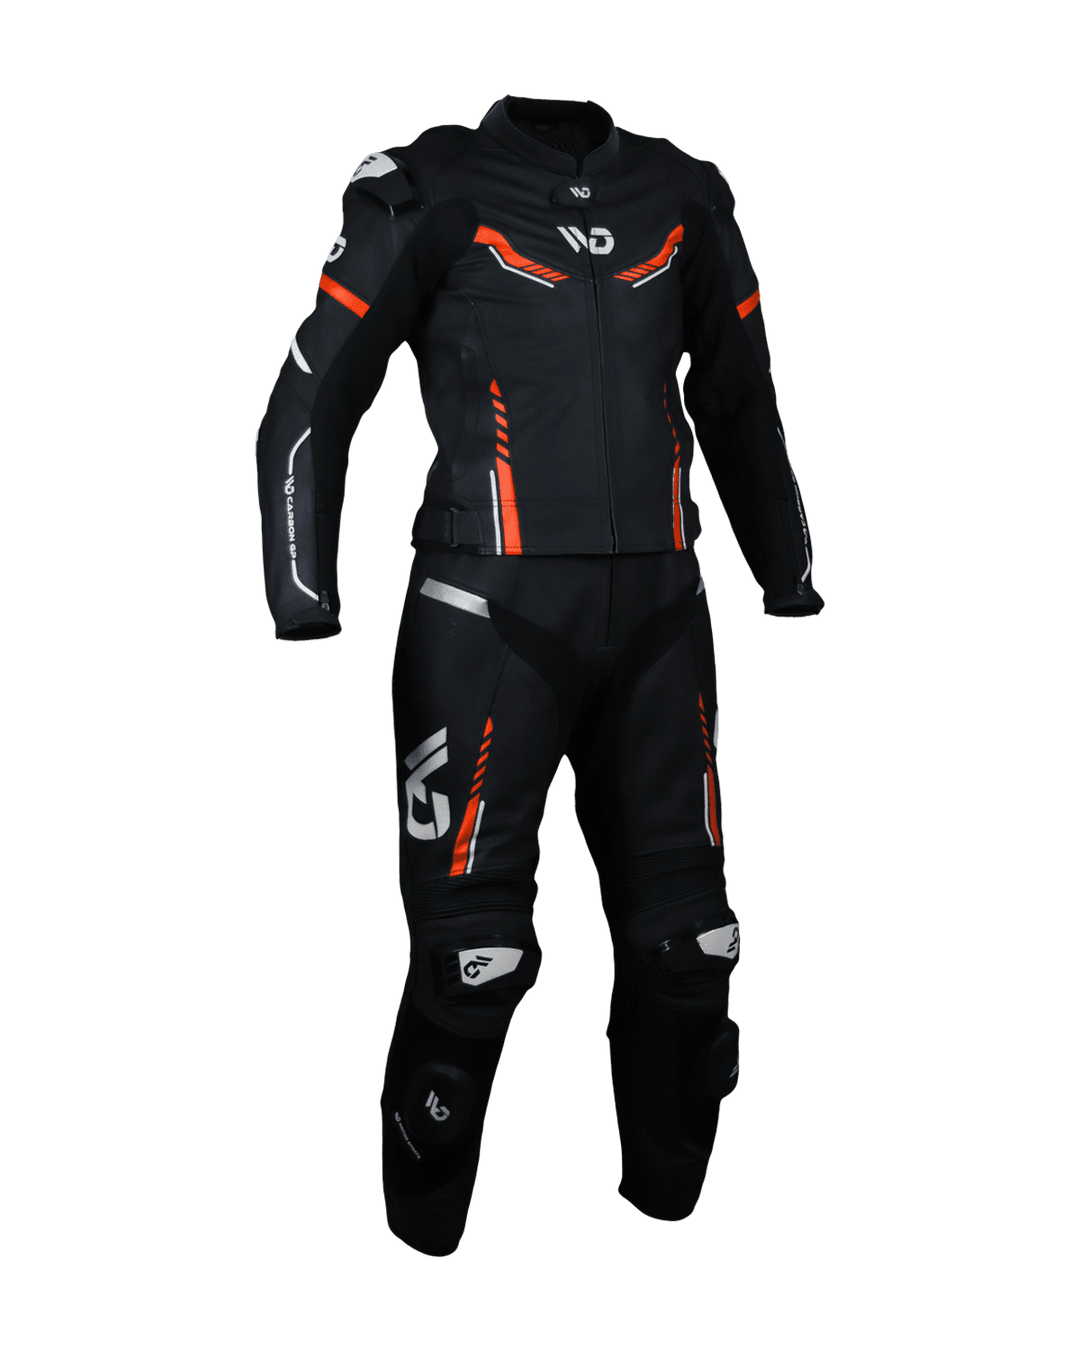 WD CARBON GP 2-PC - Red - Motorcycle Leather Suit - Front View